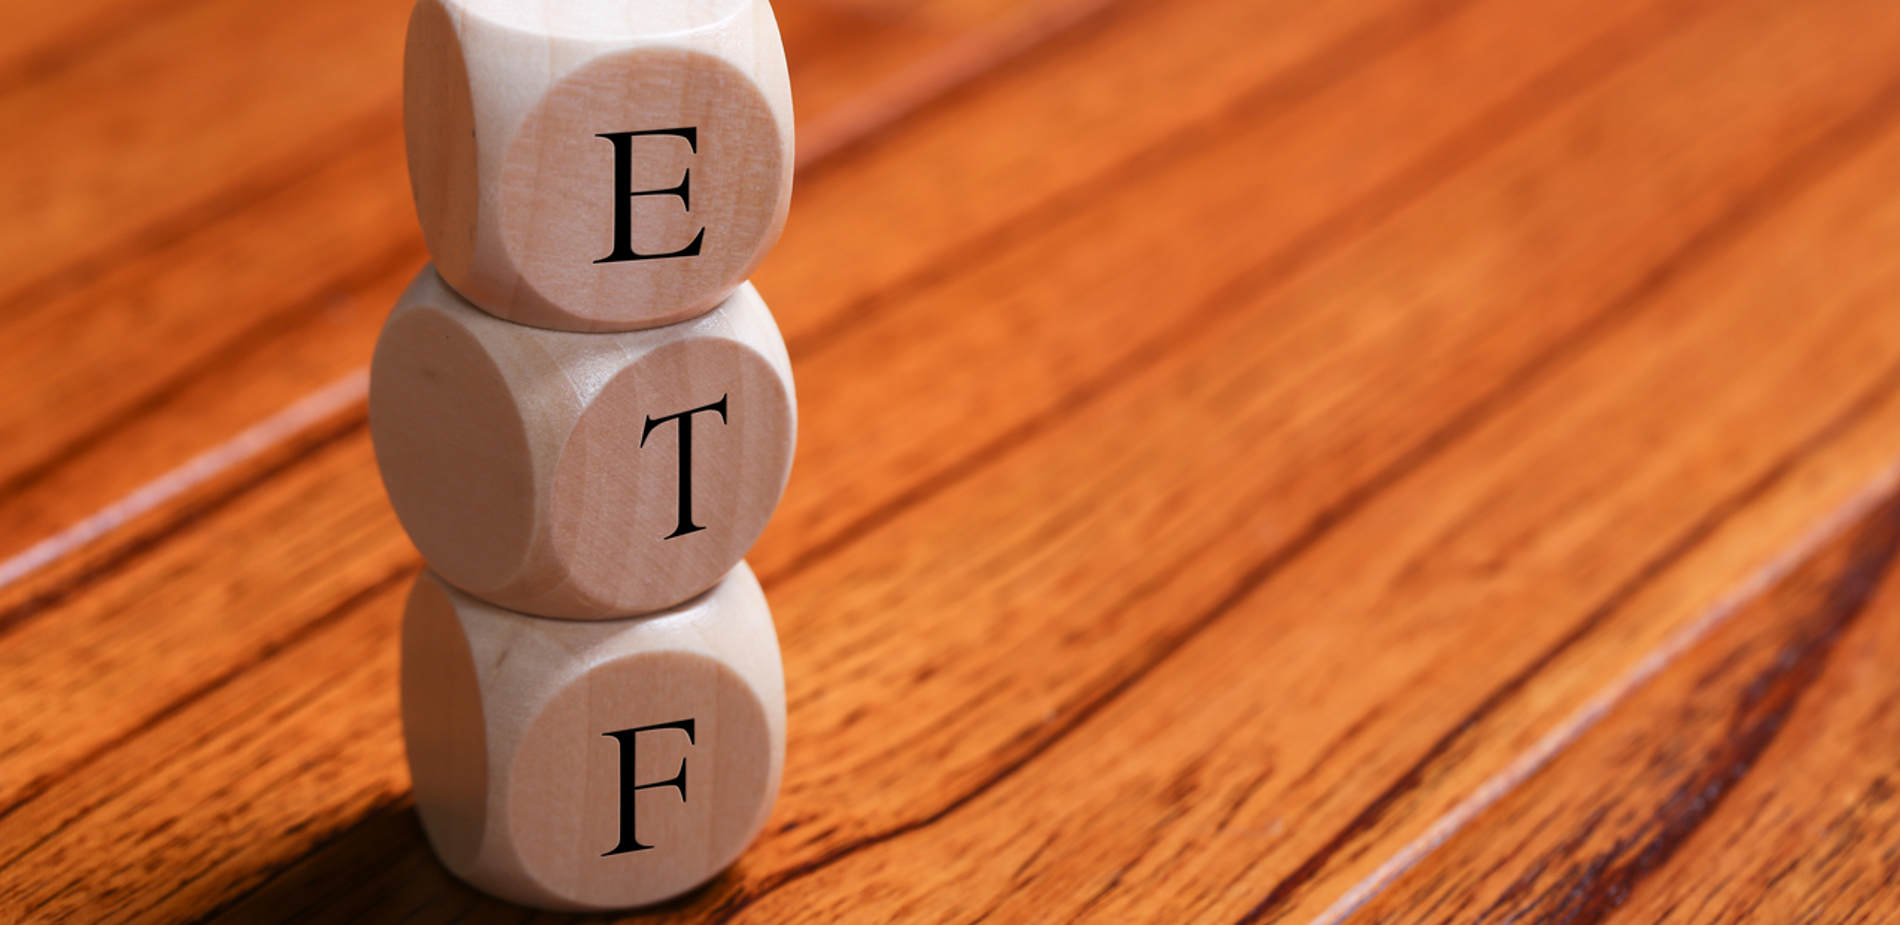 Commodity ETF List - The Ultimate Guide for Investors